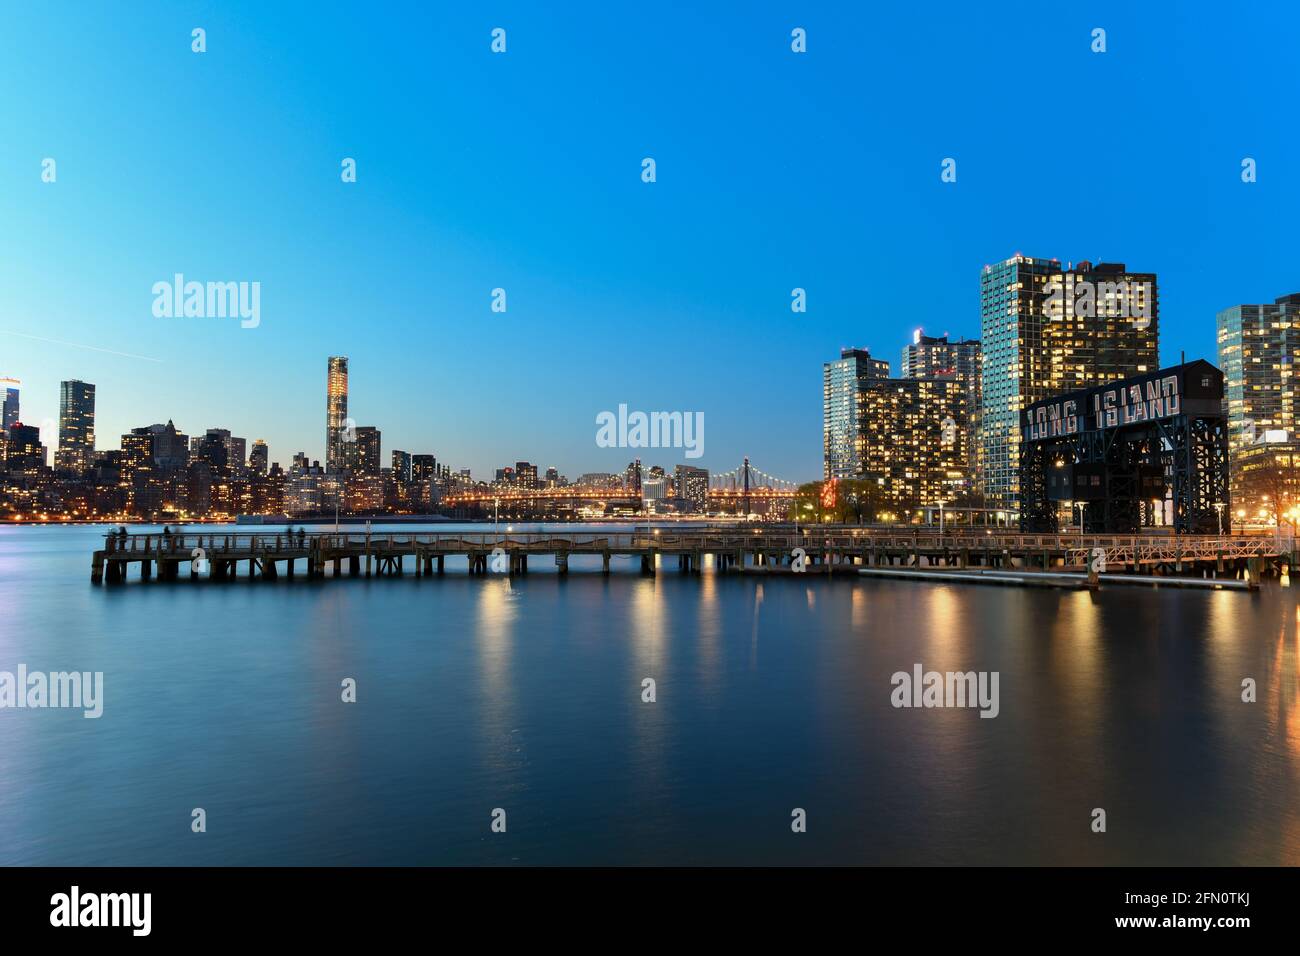 New York City - Apr 7, 2021: View of Midtown Manhattan at sunset from Long Island City, Queens, New York City. Stock Photo